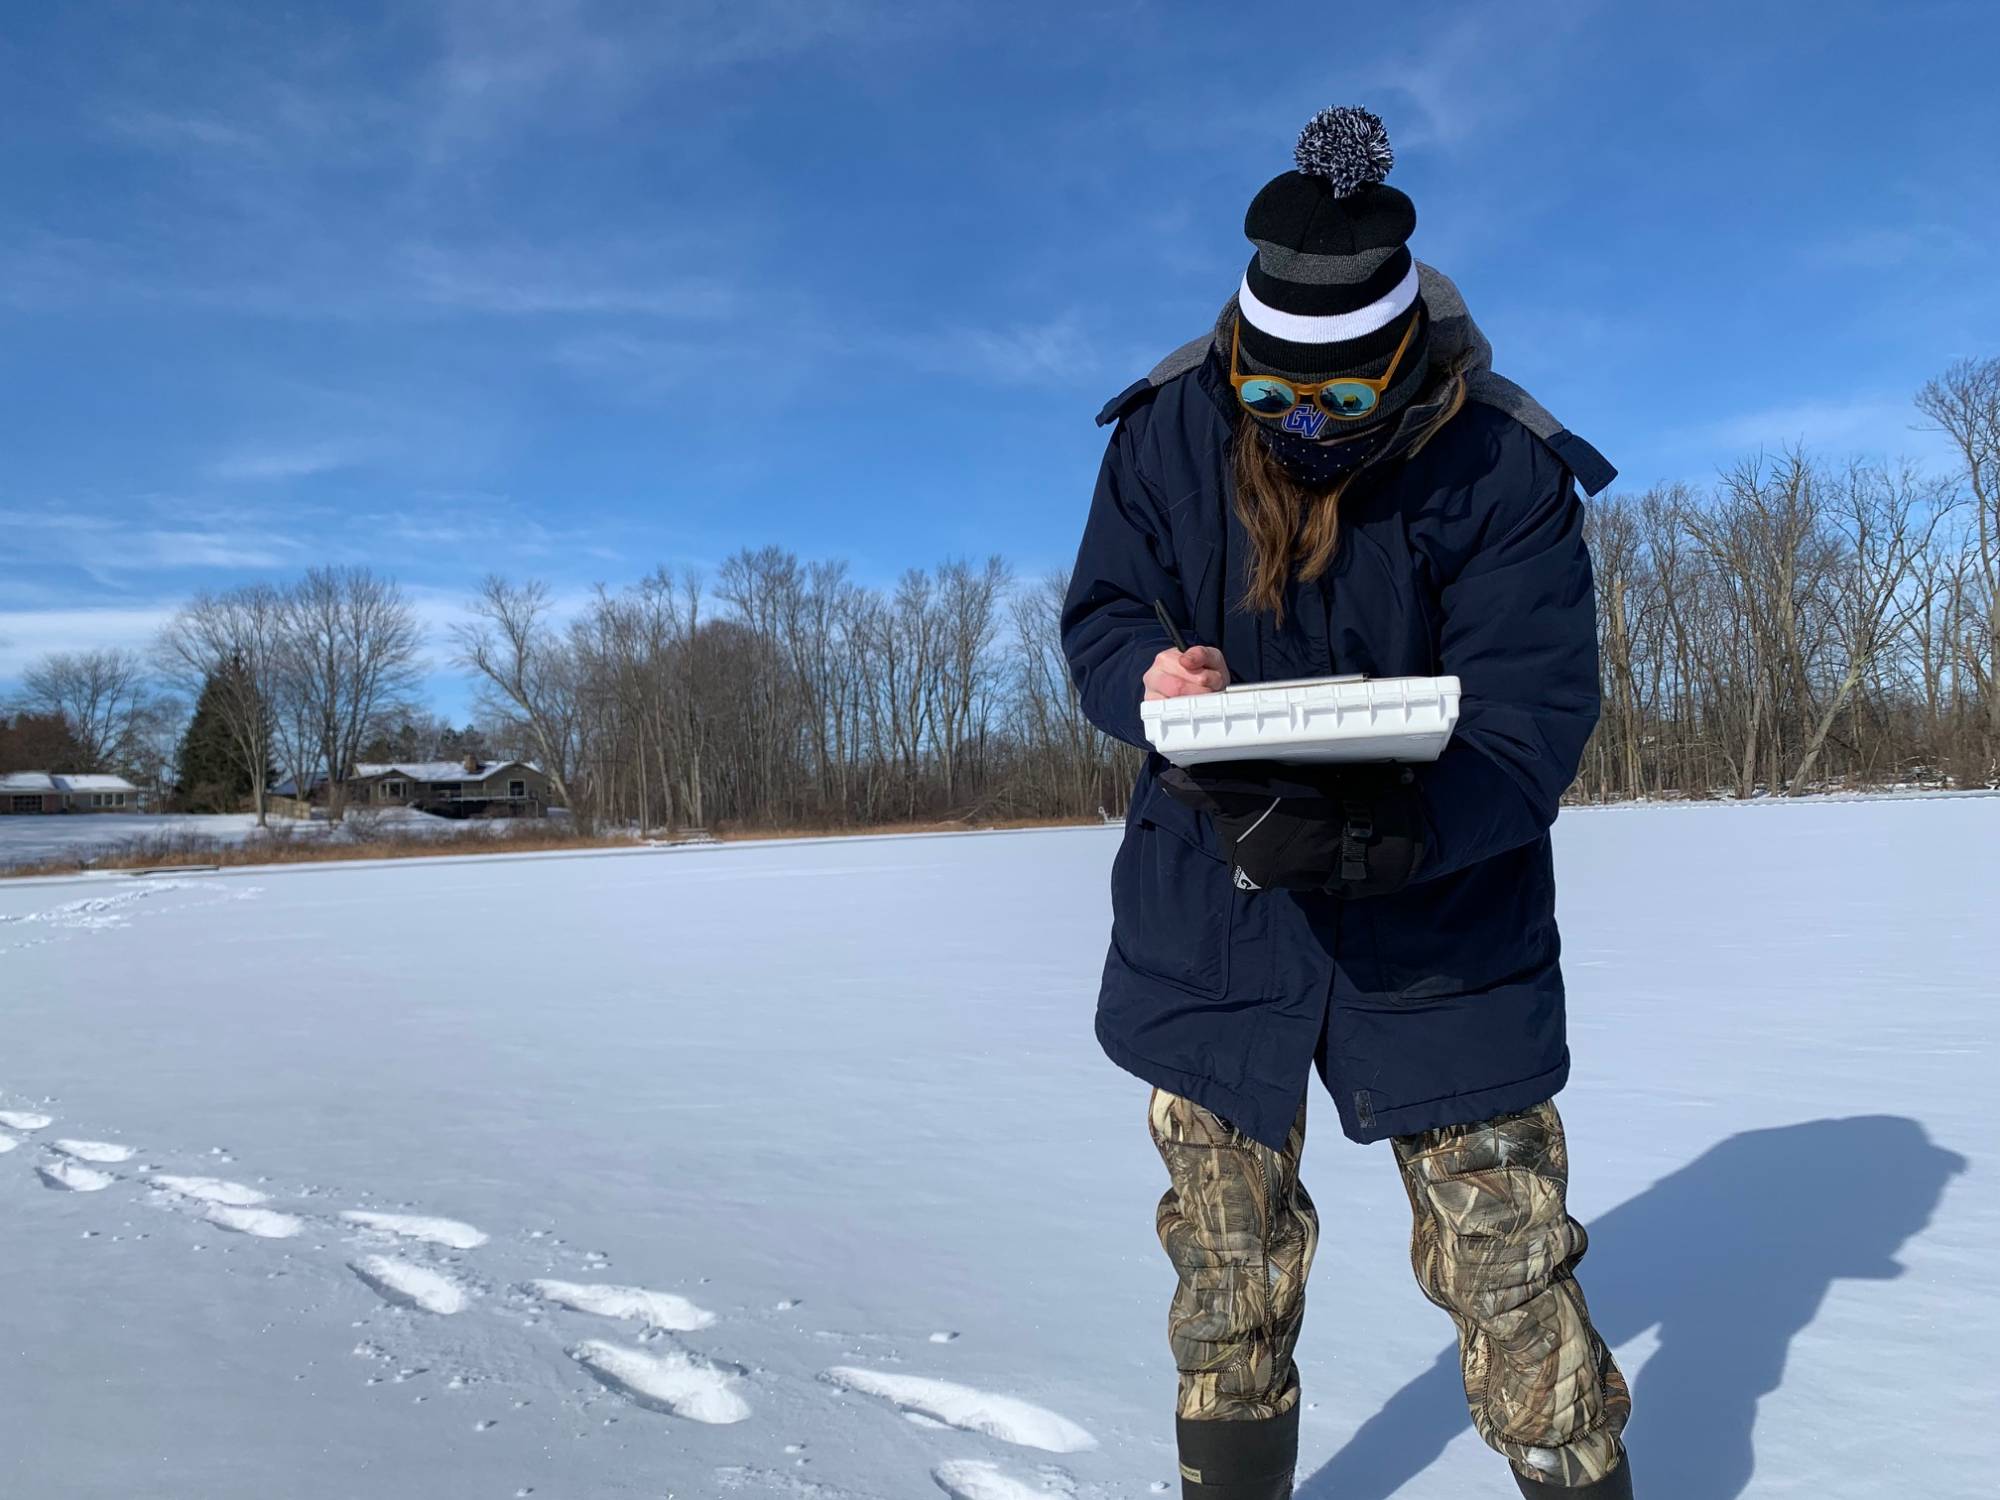 Graduate student Ellen Foley measuring water quality at Church Lake during winter weather.